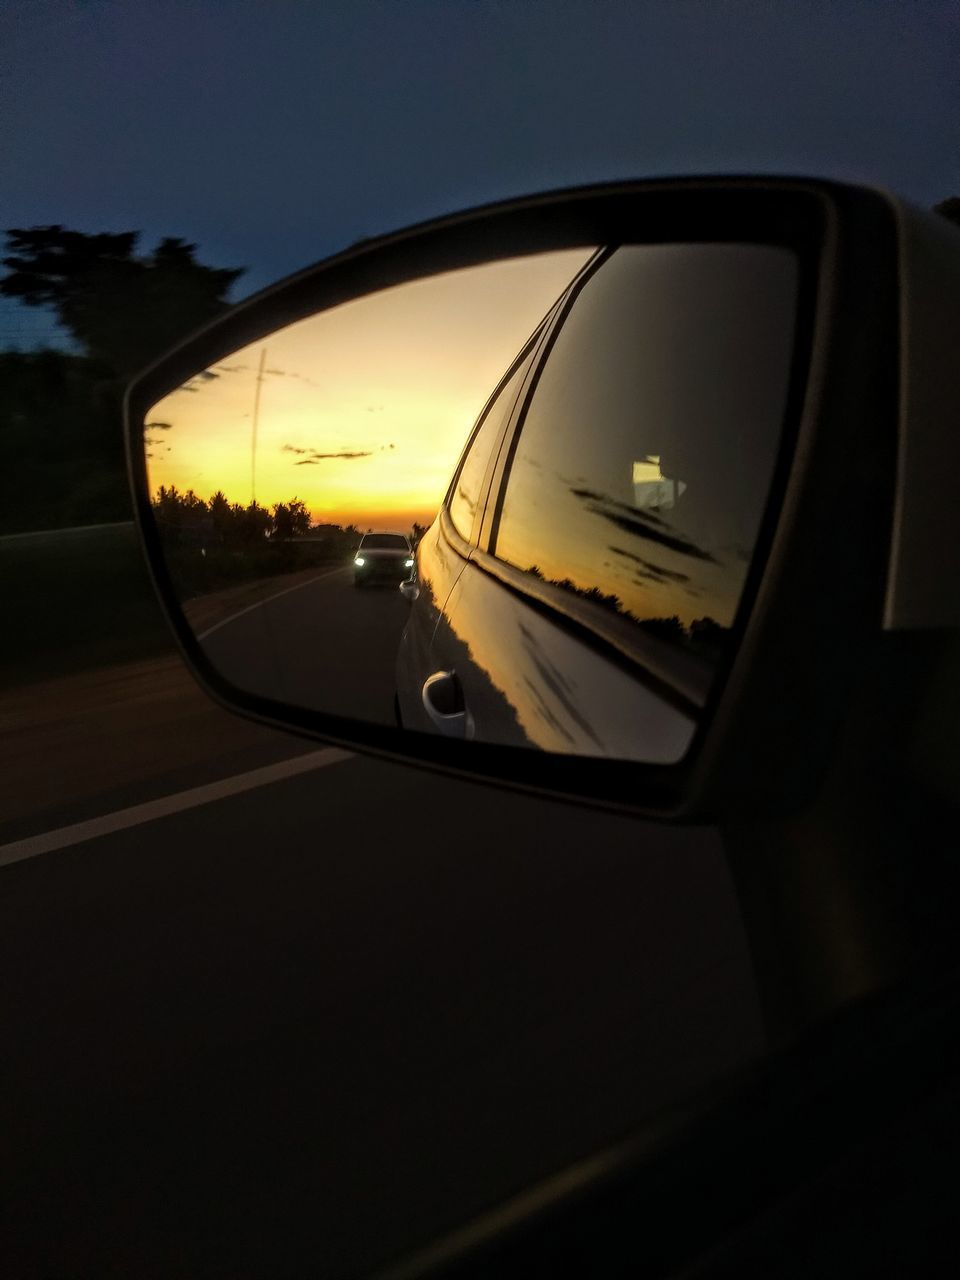 REFLECTION OF SIDE-VIEW MIRROR IN CAR